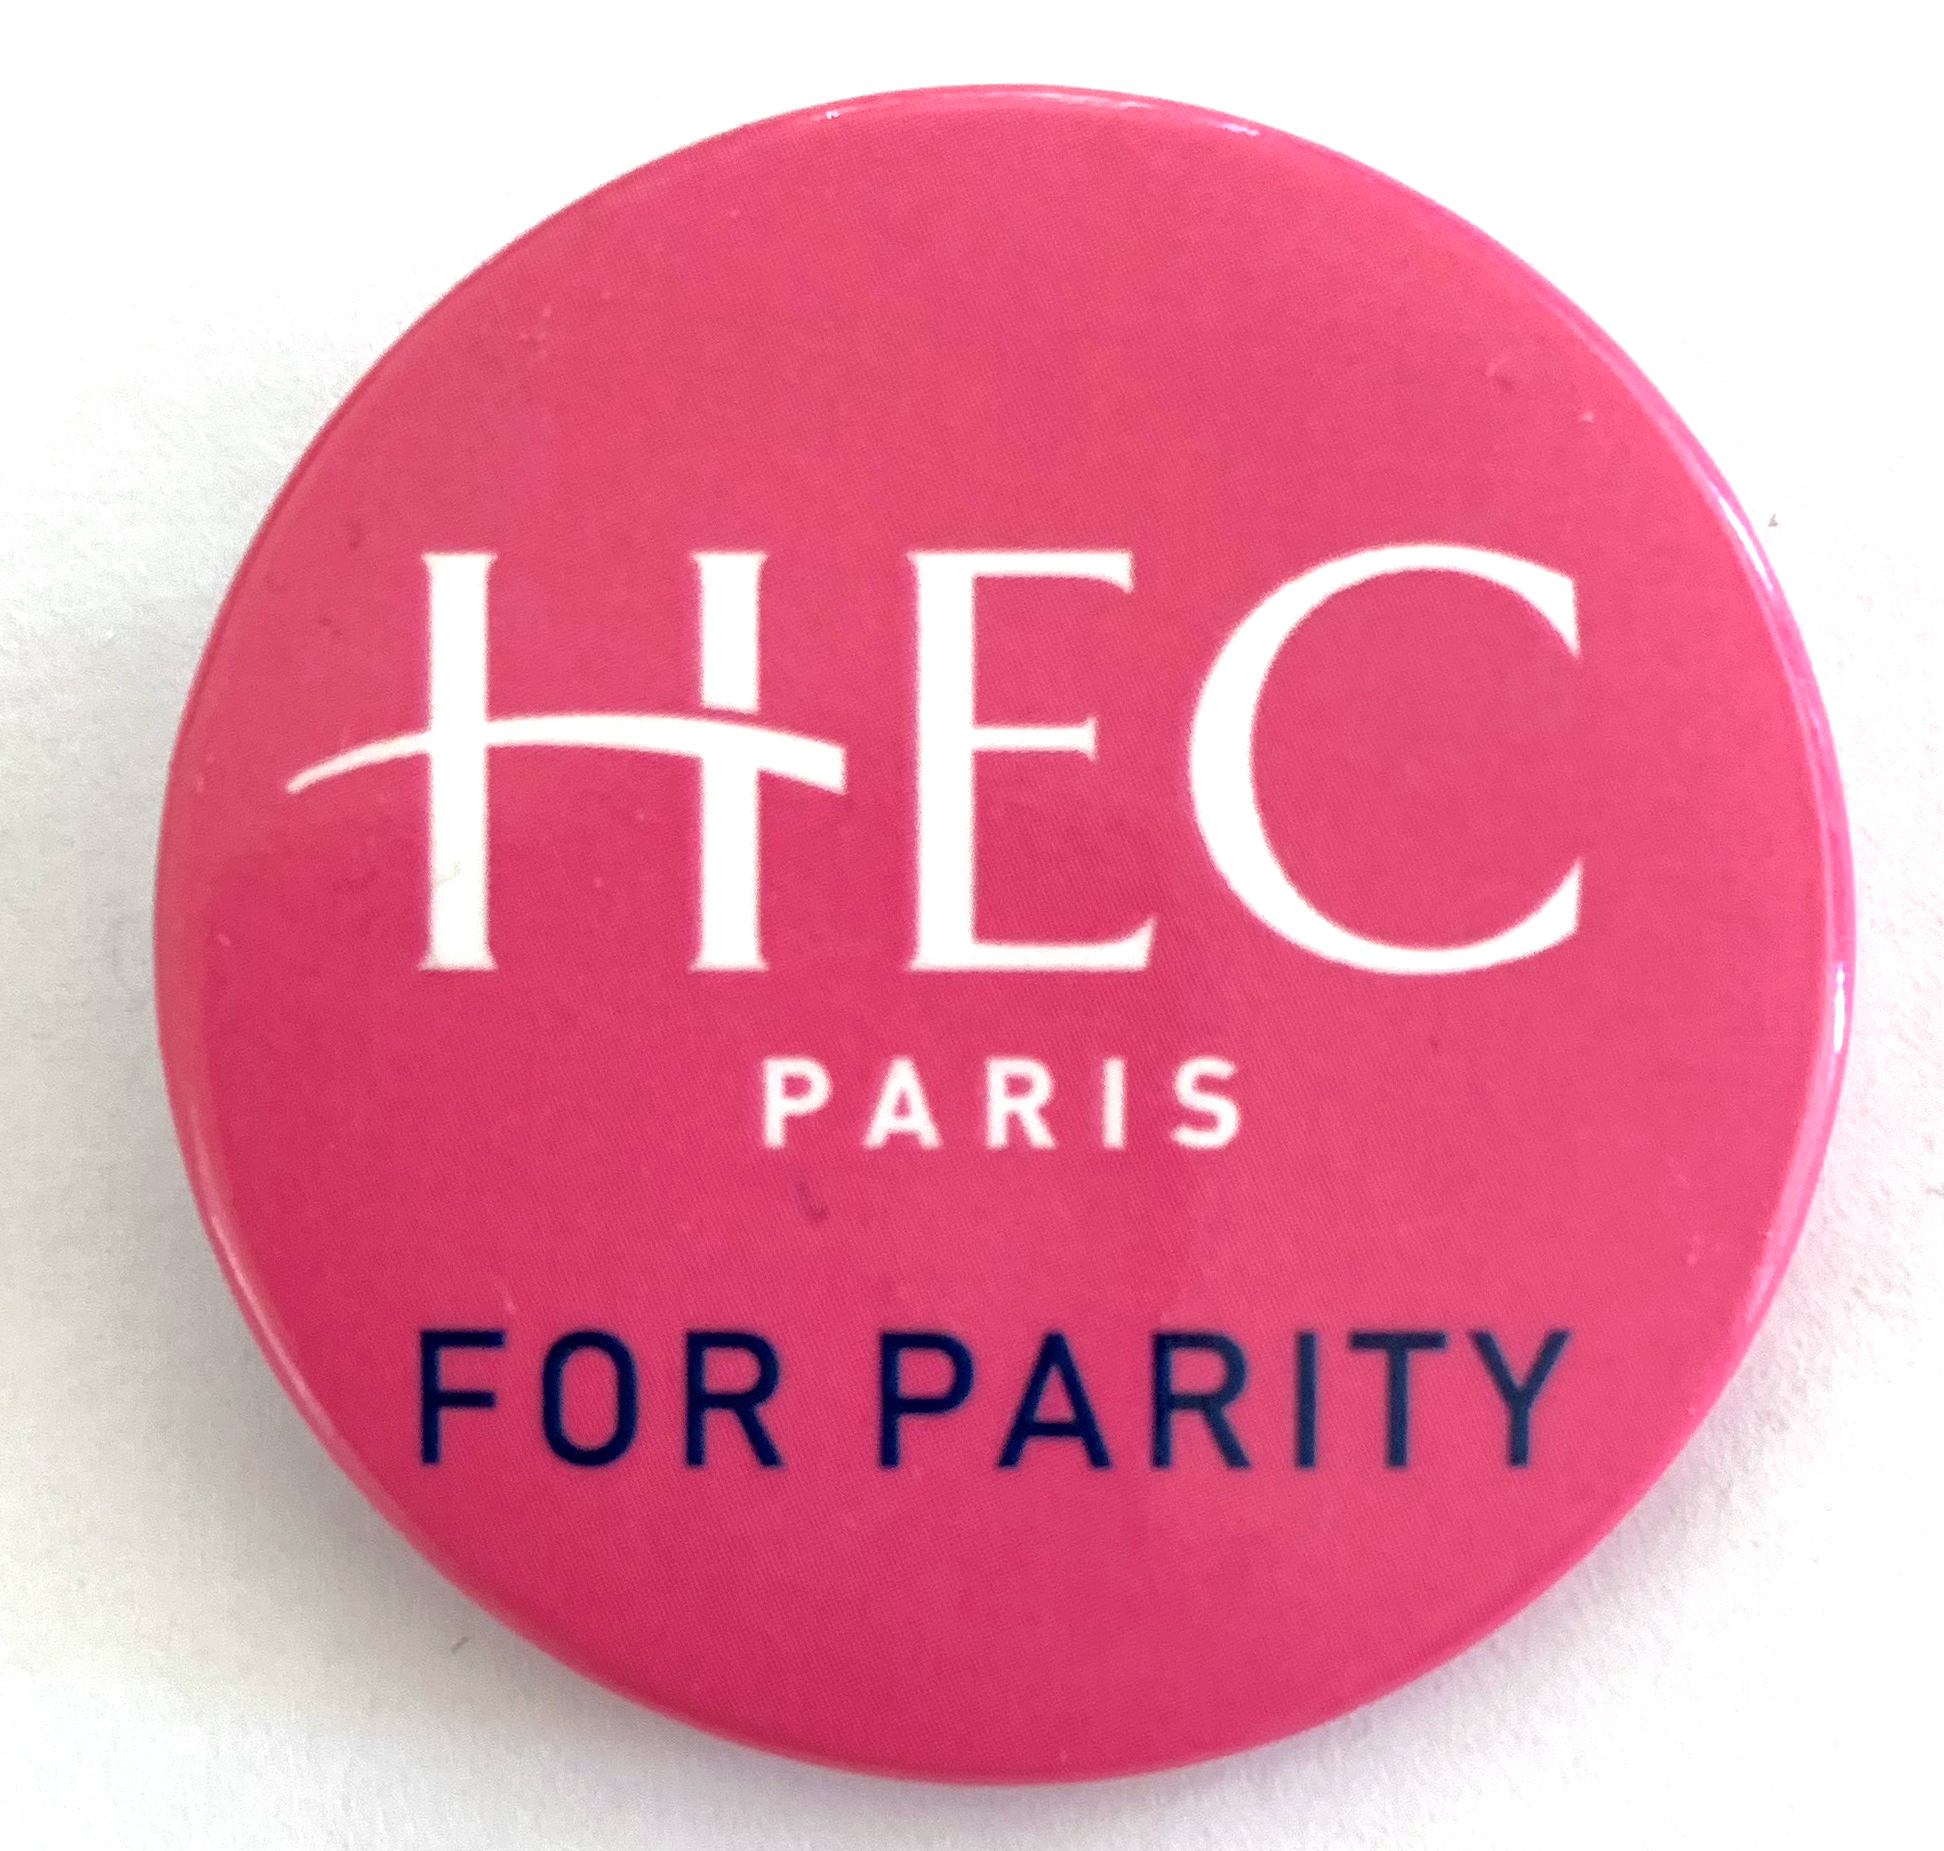 image of HEC for Parity button